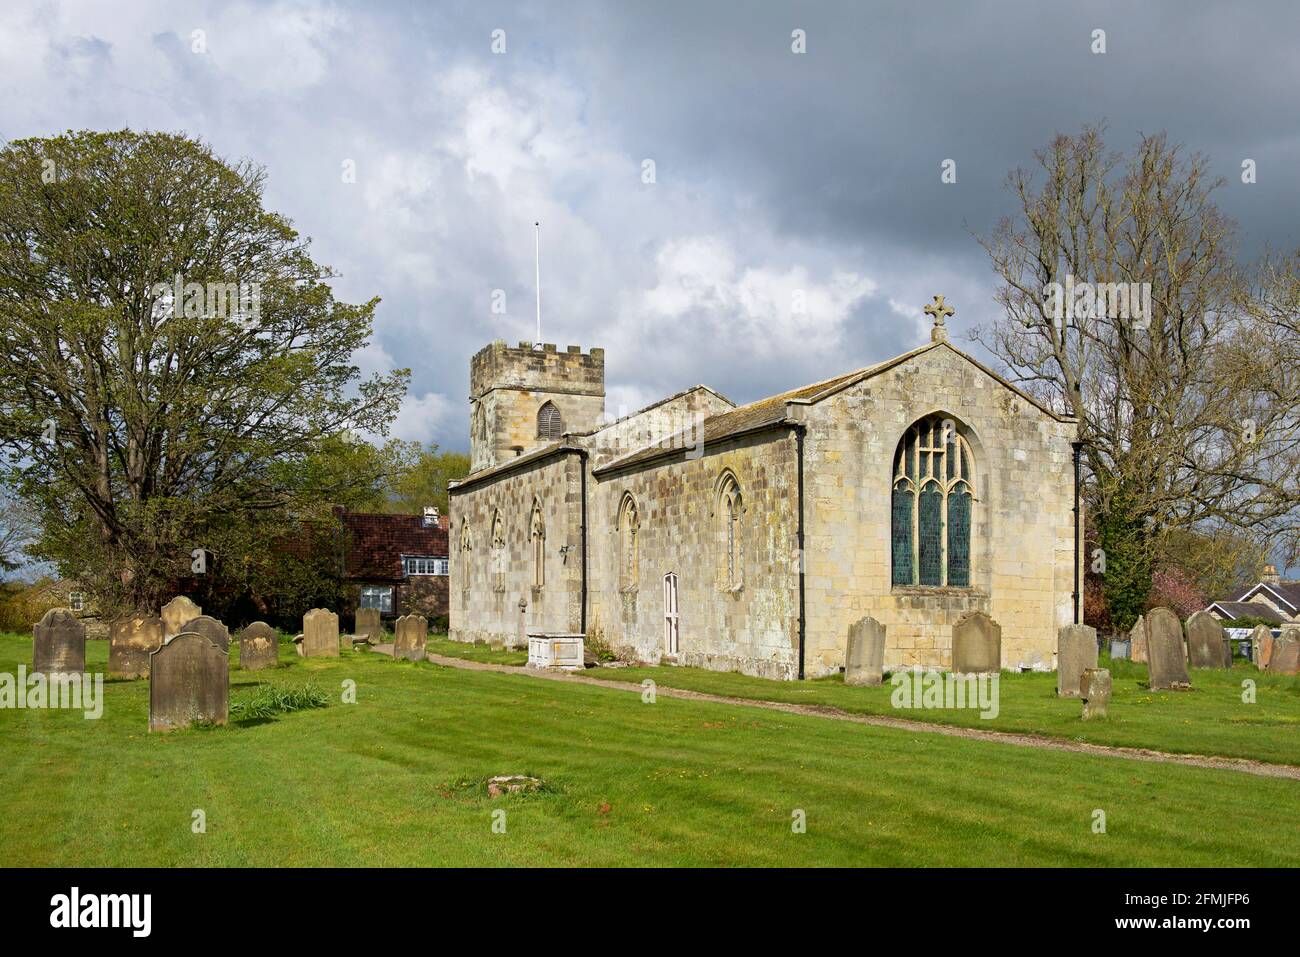 St Andrew's church in the village of Langton, near Driffield, Ryedale, North Yorkshire, England UK Stock Photo